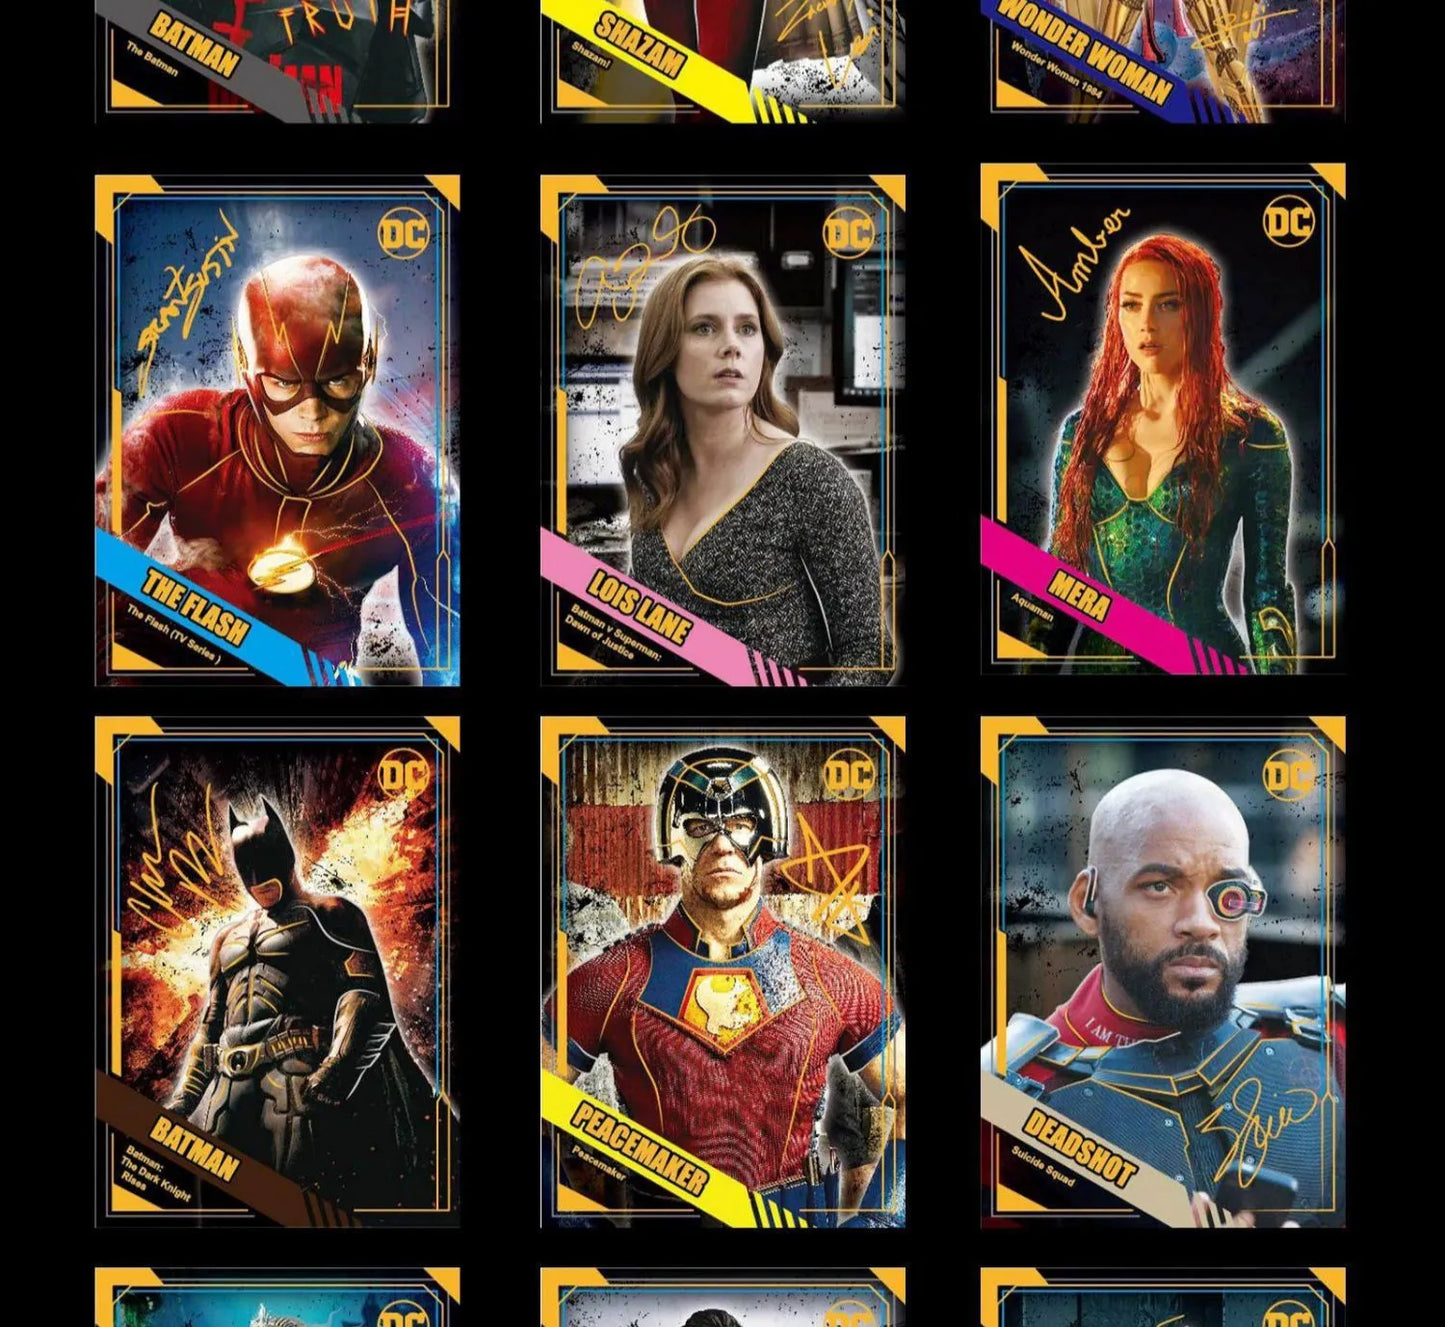 DC Universe Collector Cards